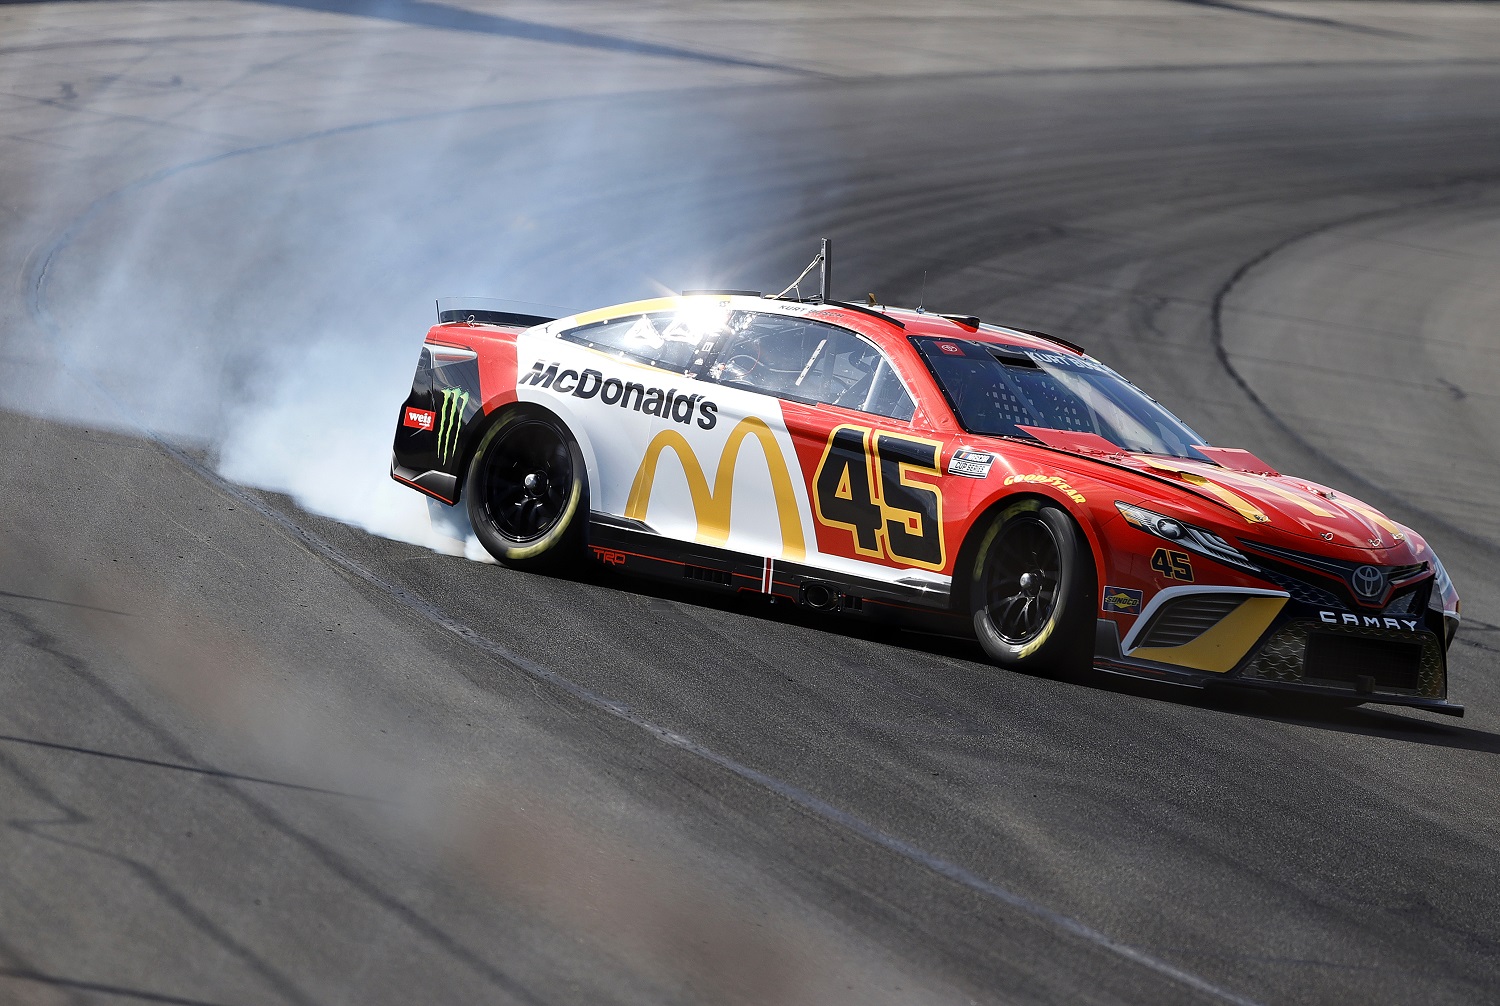 Kurt Busch spins after an on-track incident in the No. 45 Toyota during qualifying for the NASCAR Cup Series M&Ms Fan Appreciation 400 on July 23, 2022, in Long Pond, Pennsylvania. | Tim Nwachukwu/Getty Images